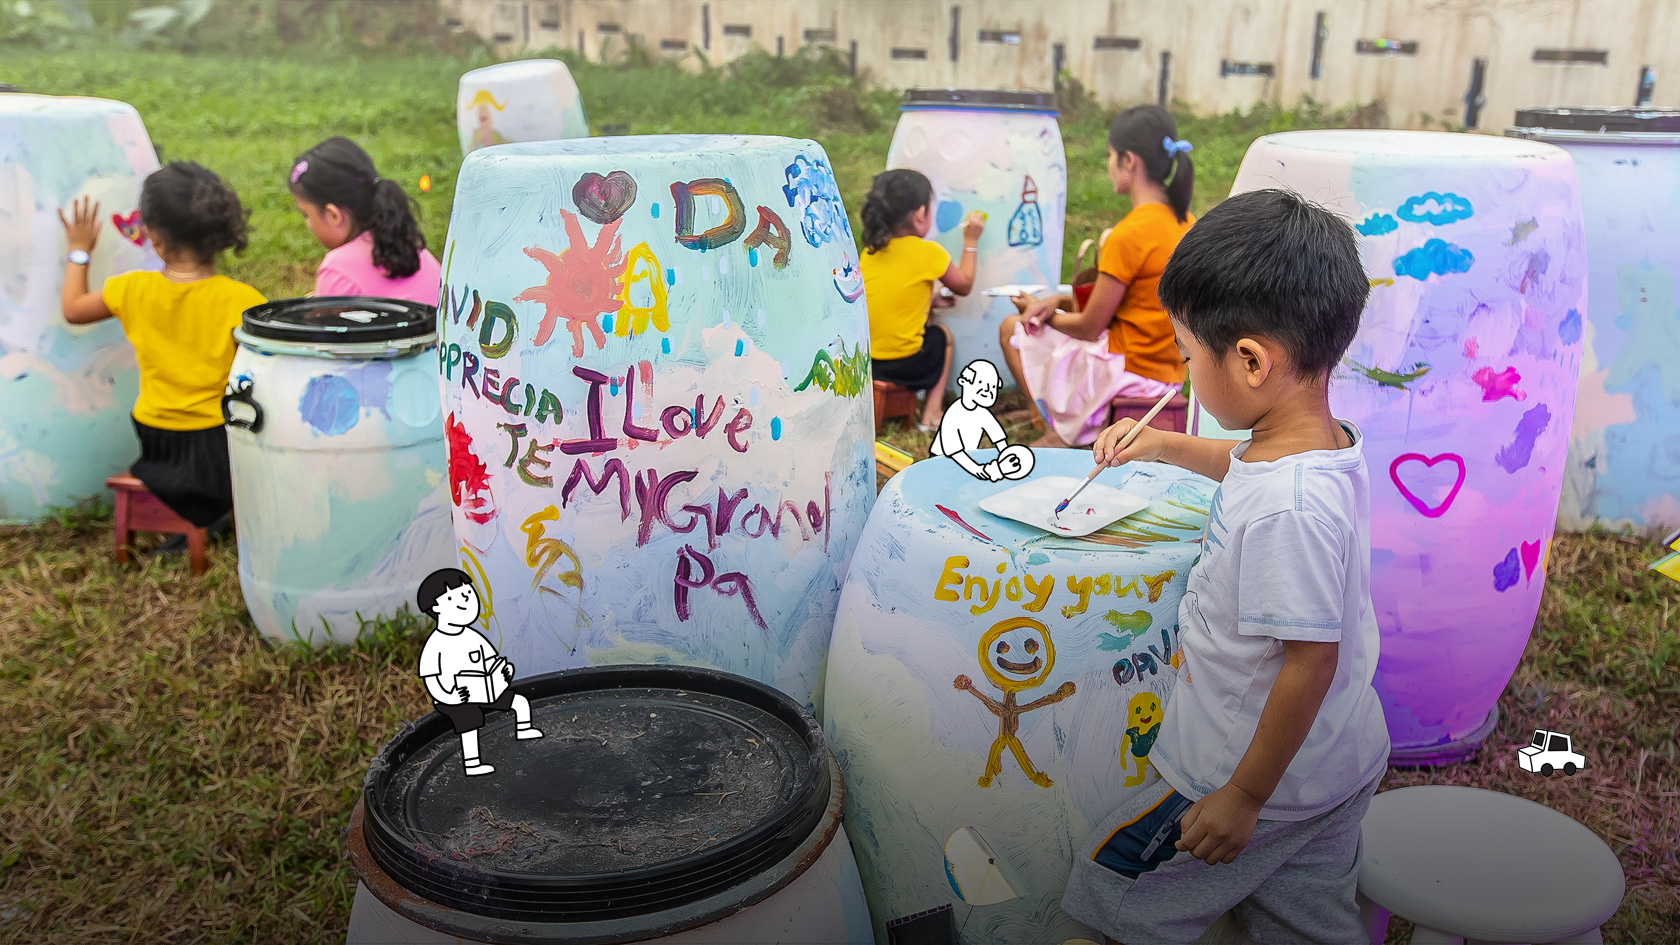 Carnival at Both Sides, Now at Telok Blangah with children using paint to decorate blue barrels in a grass patch